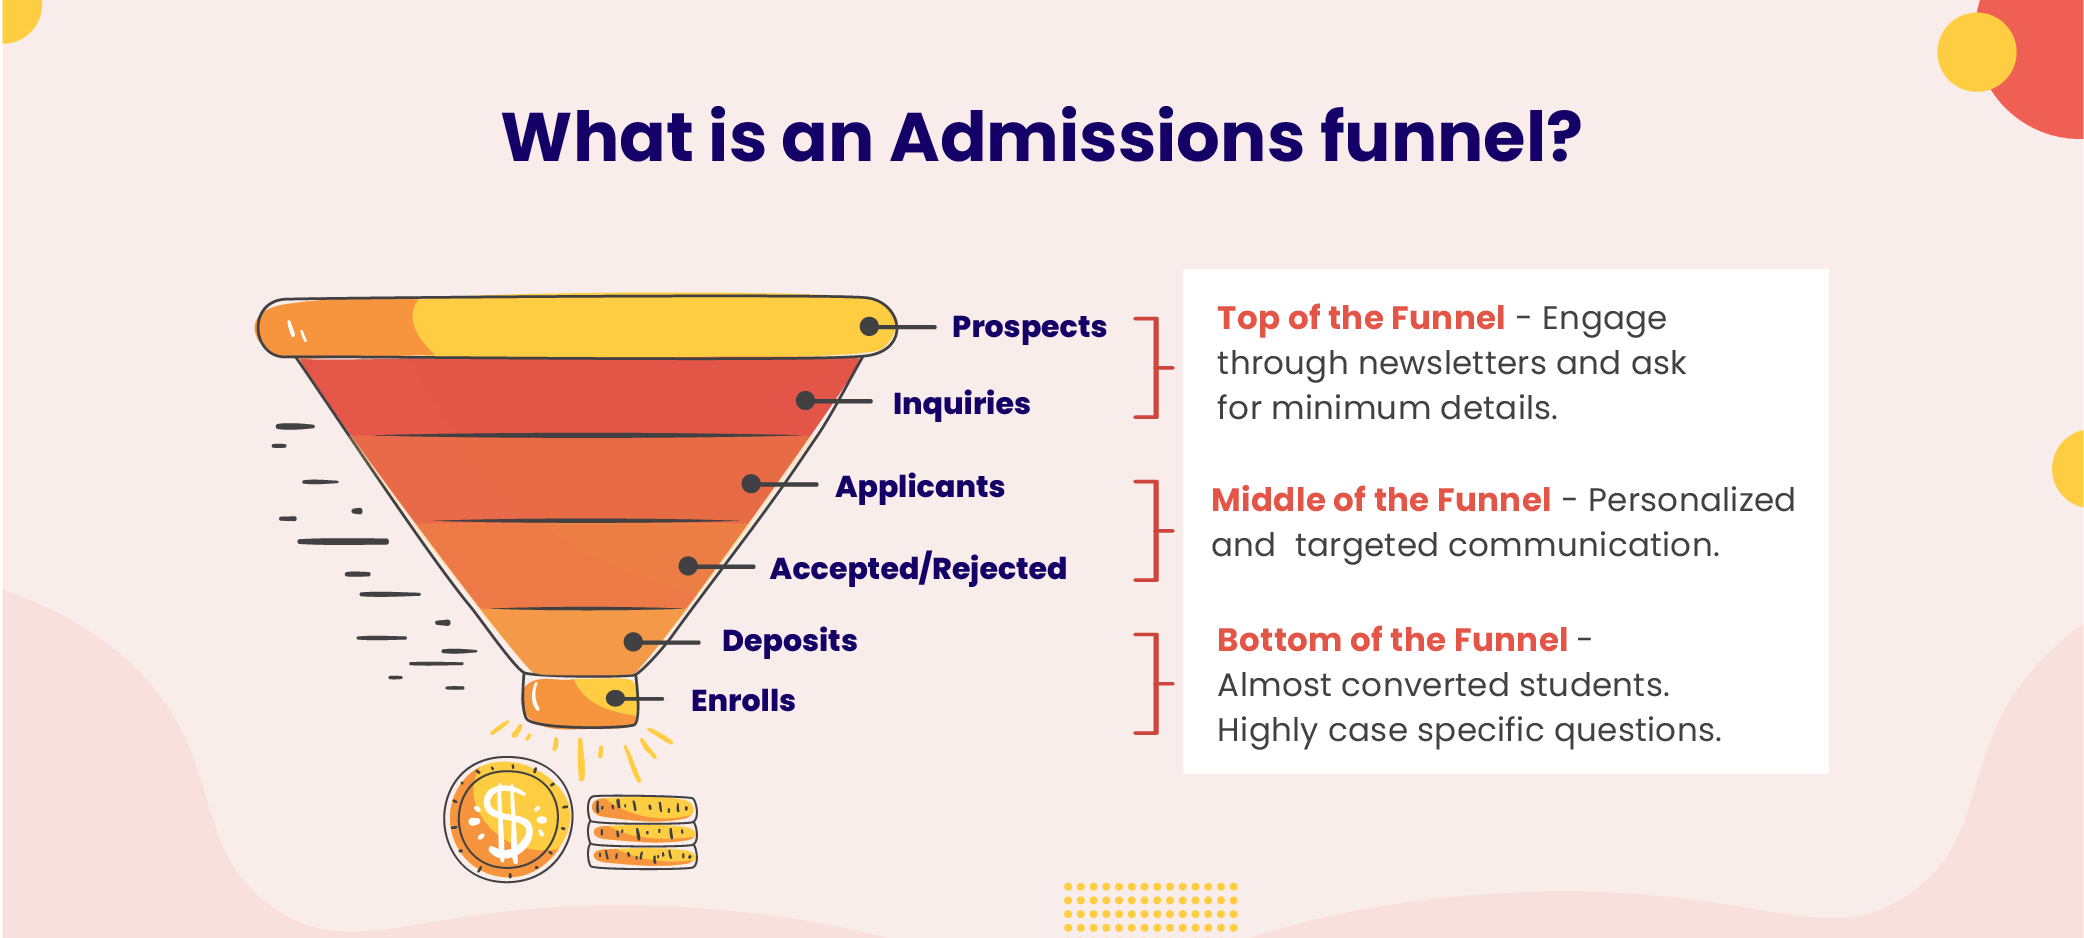 The 3 main stages of an admission funnel. Understanding this will help push students to enrollment faster.